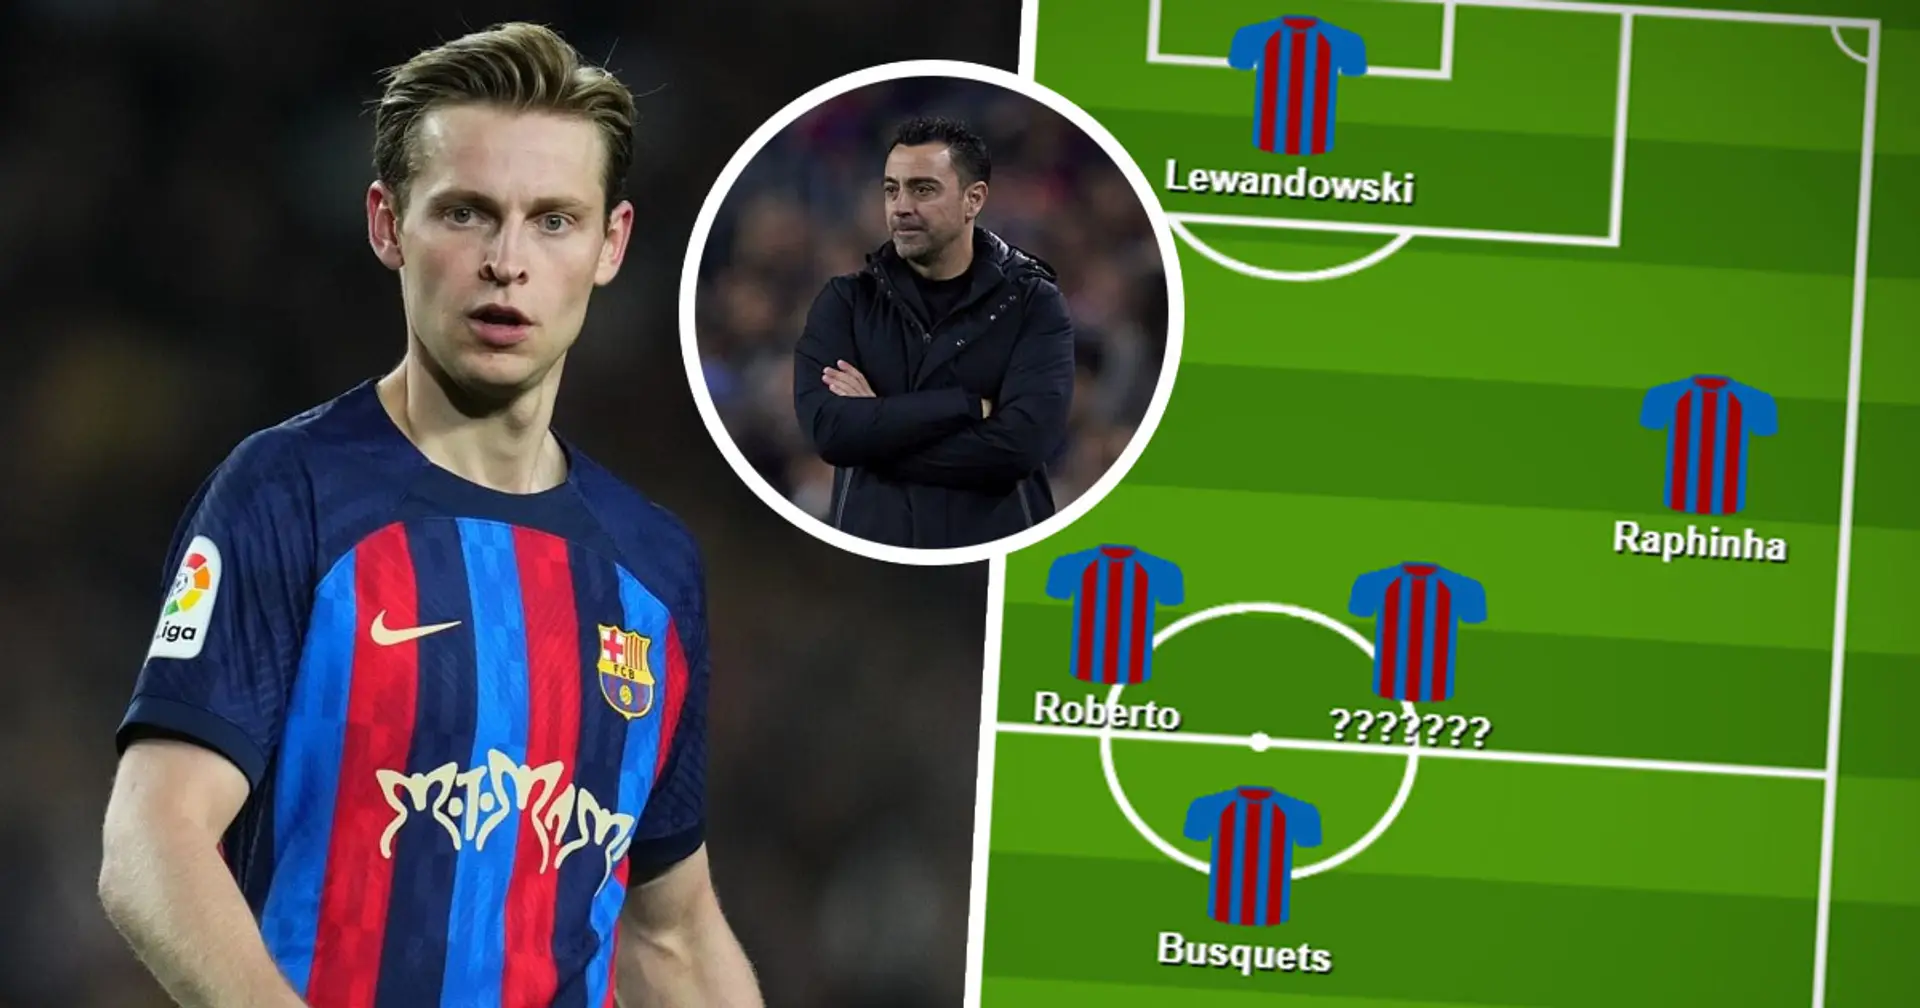 Barca 'pessimistic' about De Jong's chances to play in El Clasico, Xavi's plan for midfield unveiled